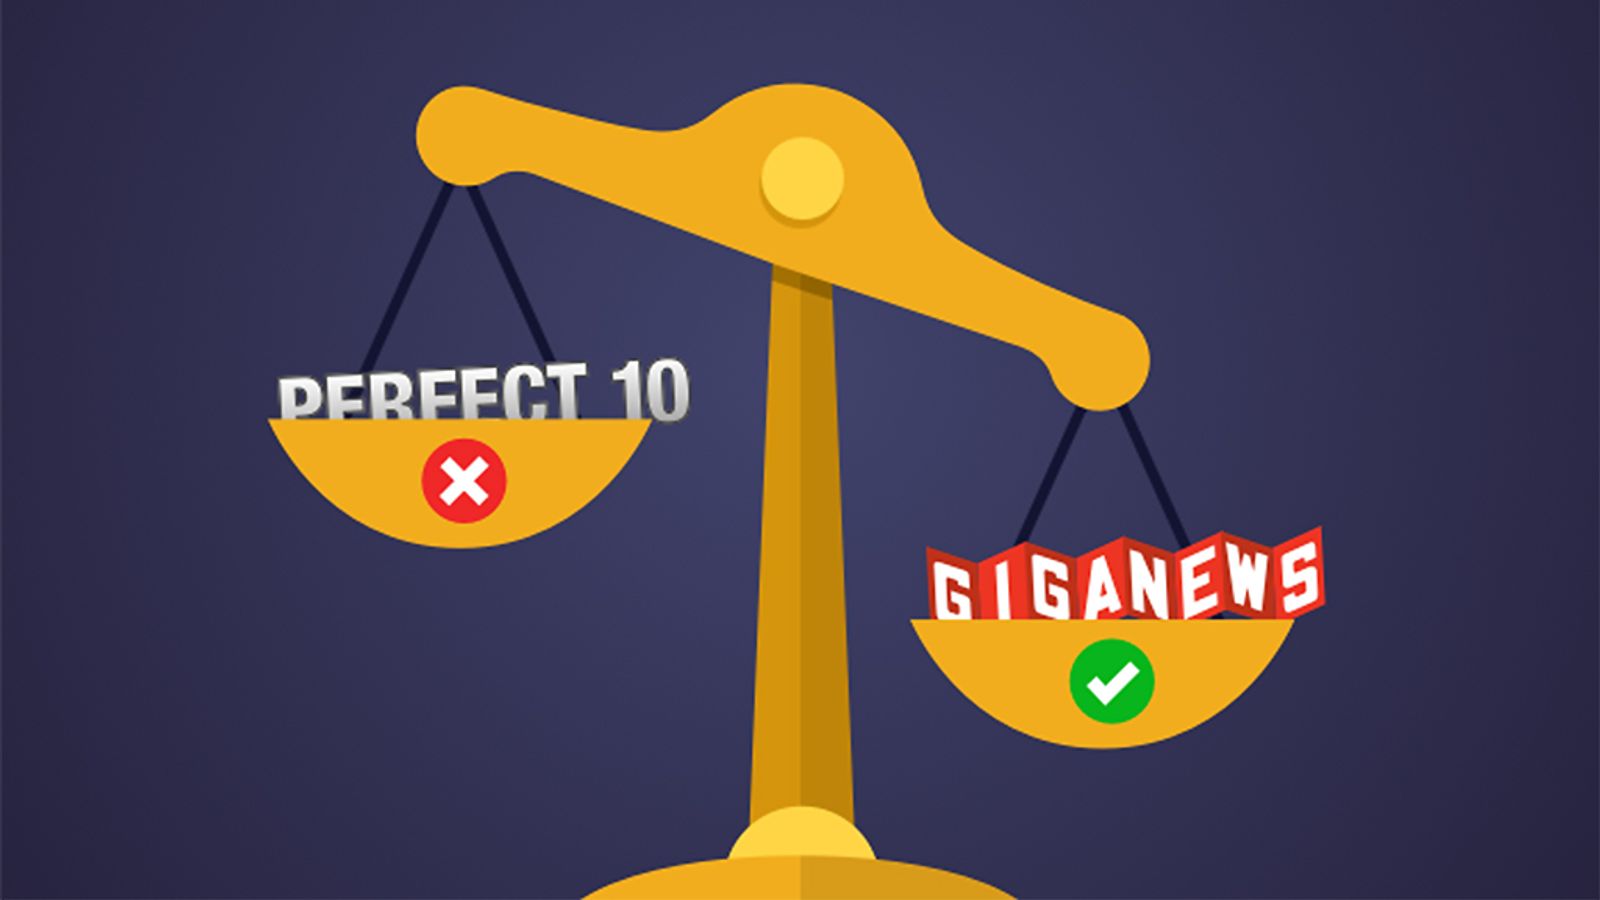 Supreme Court Rejects Perfect 10's Cert Petition in Giganews Case